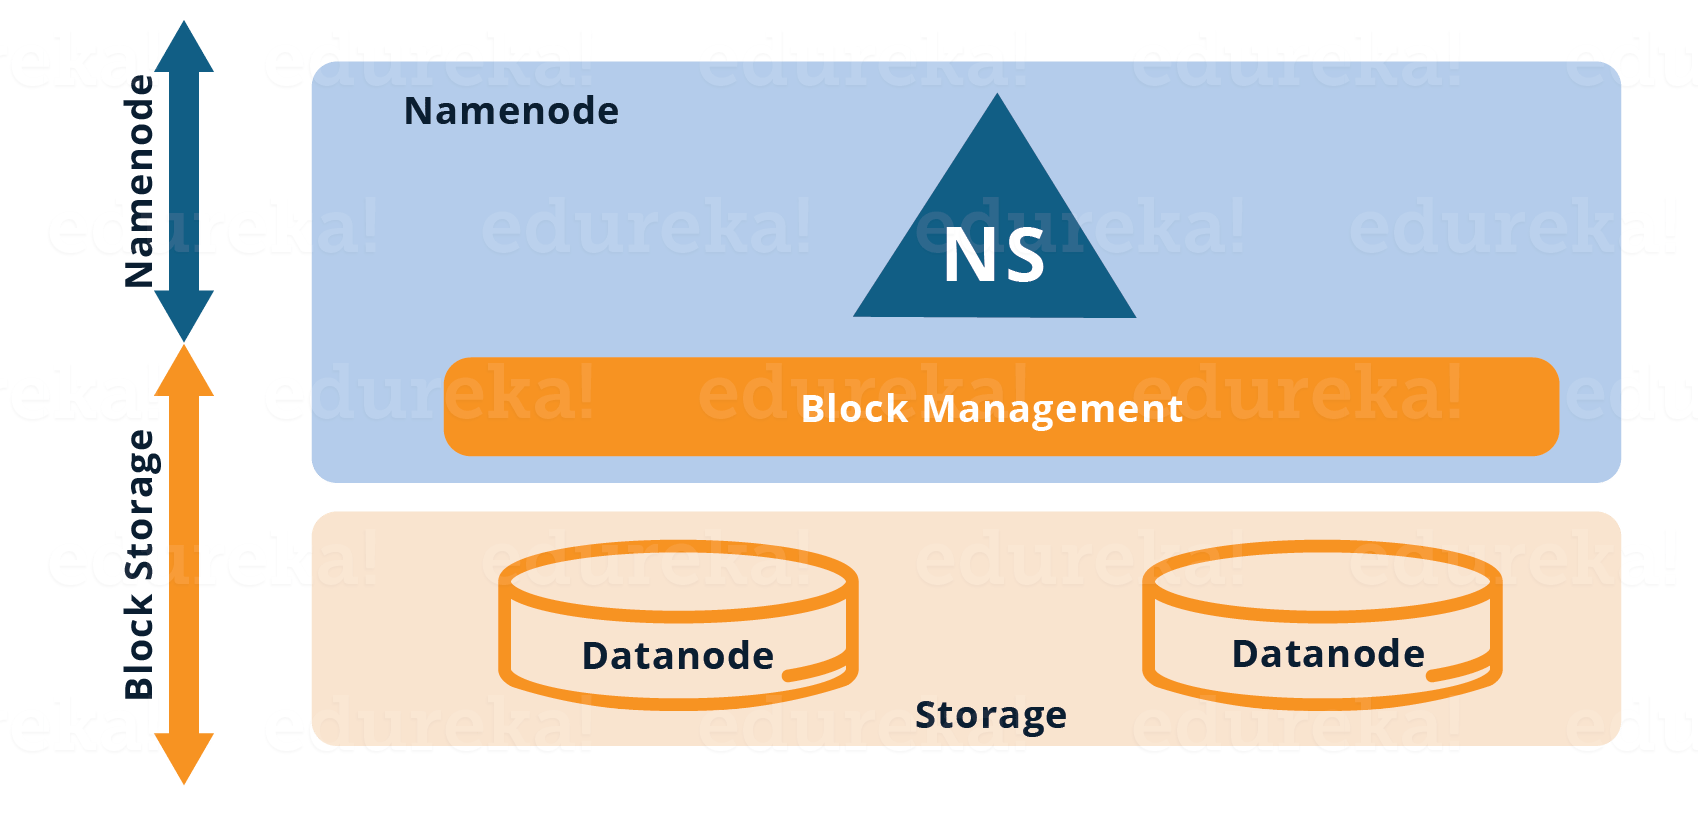 Single Namespace HDFS Architecture - Overview of Hadoop 2.0 Cluster Architecture Federation - Edureka